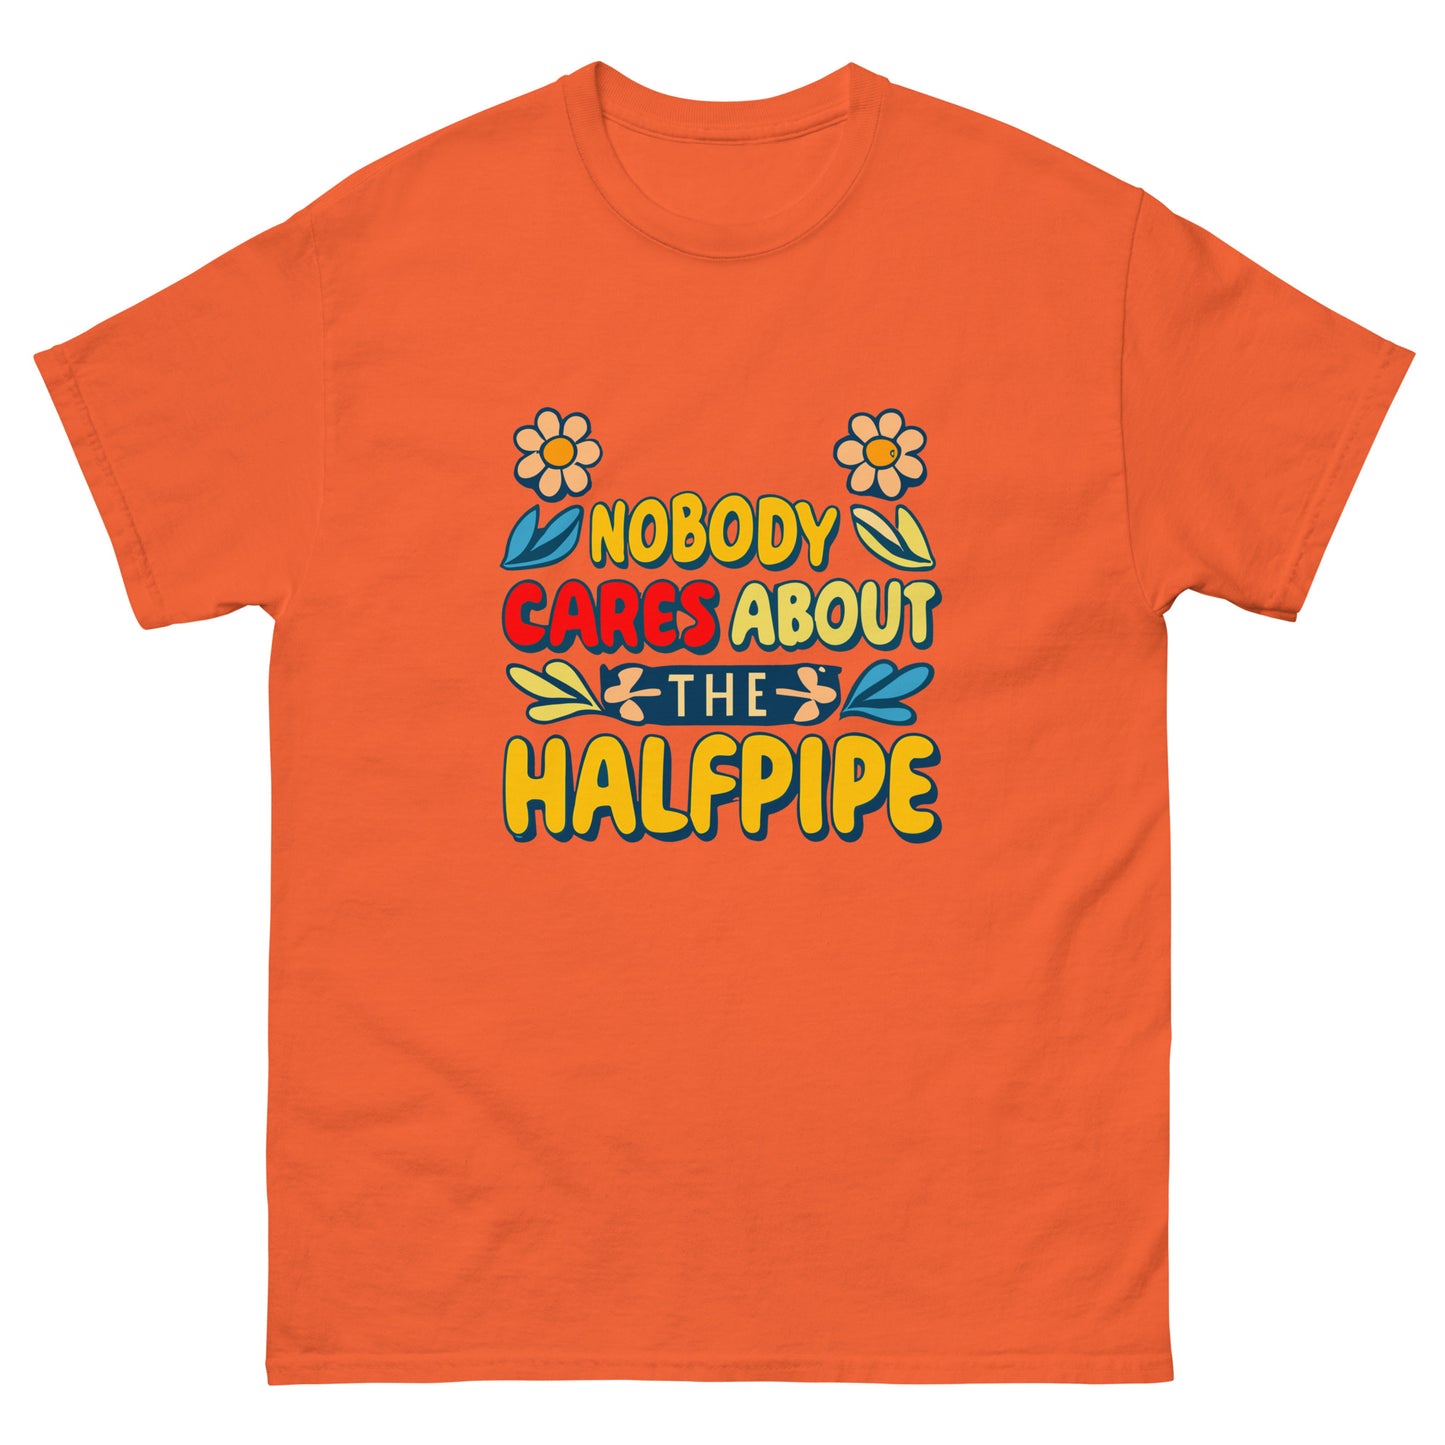 Nobody cares about the halfpipe t-shirt printed by Whistler Shirts